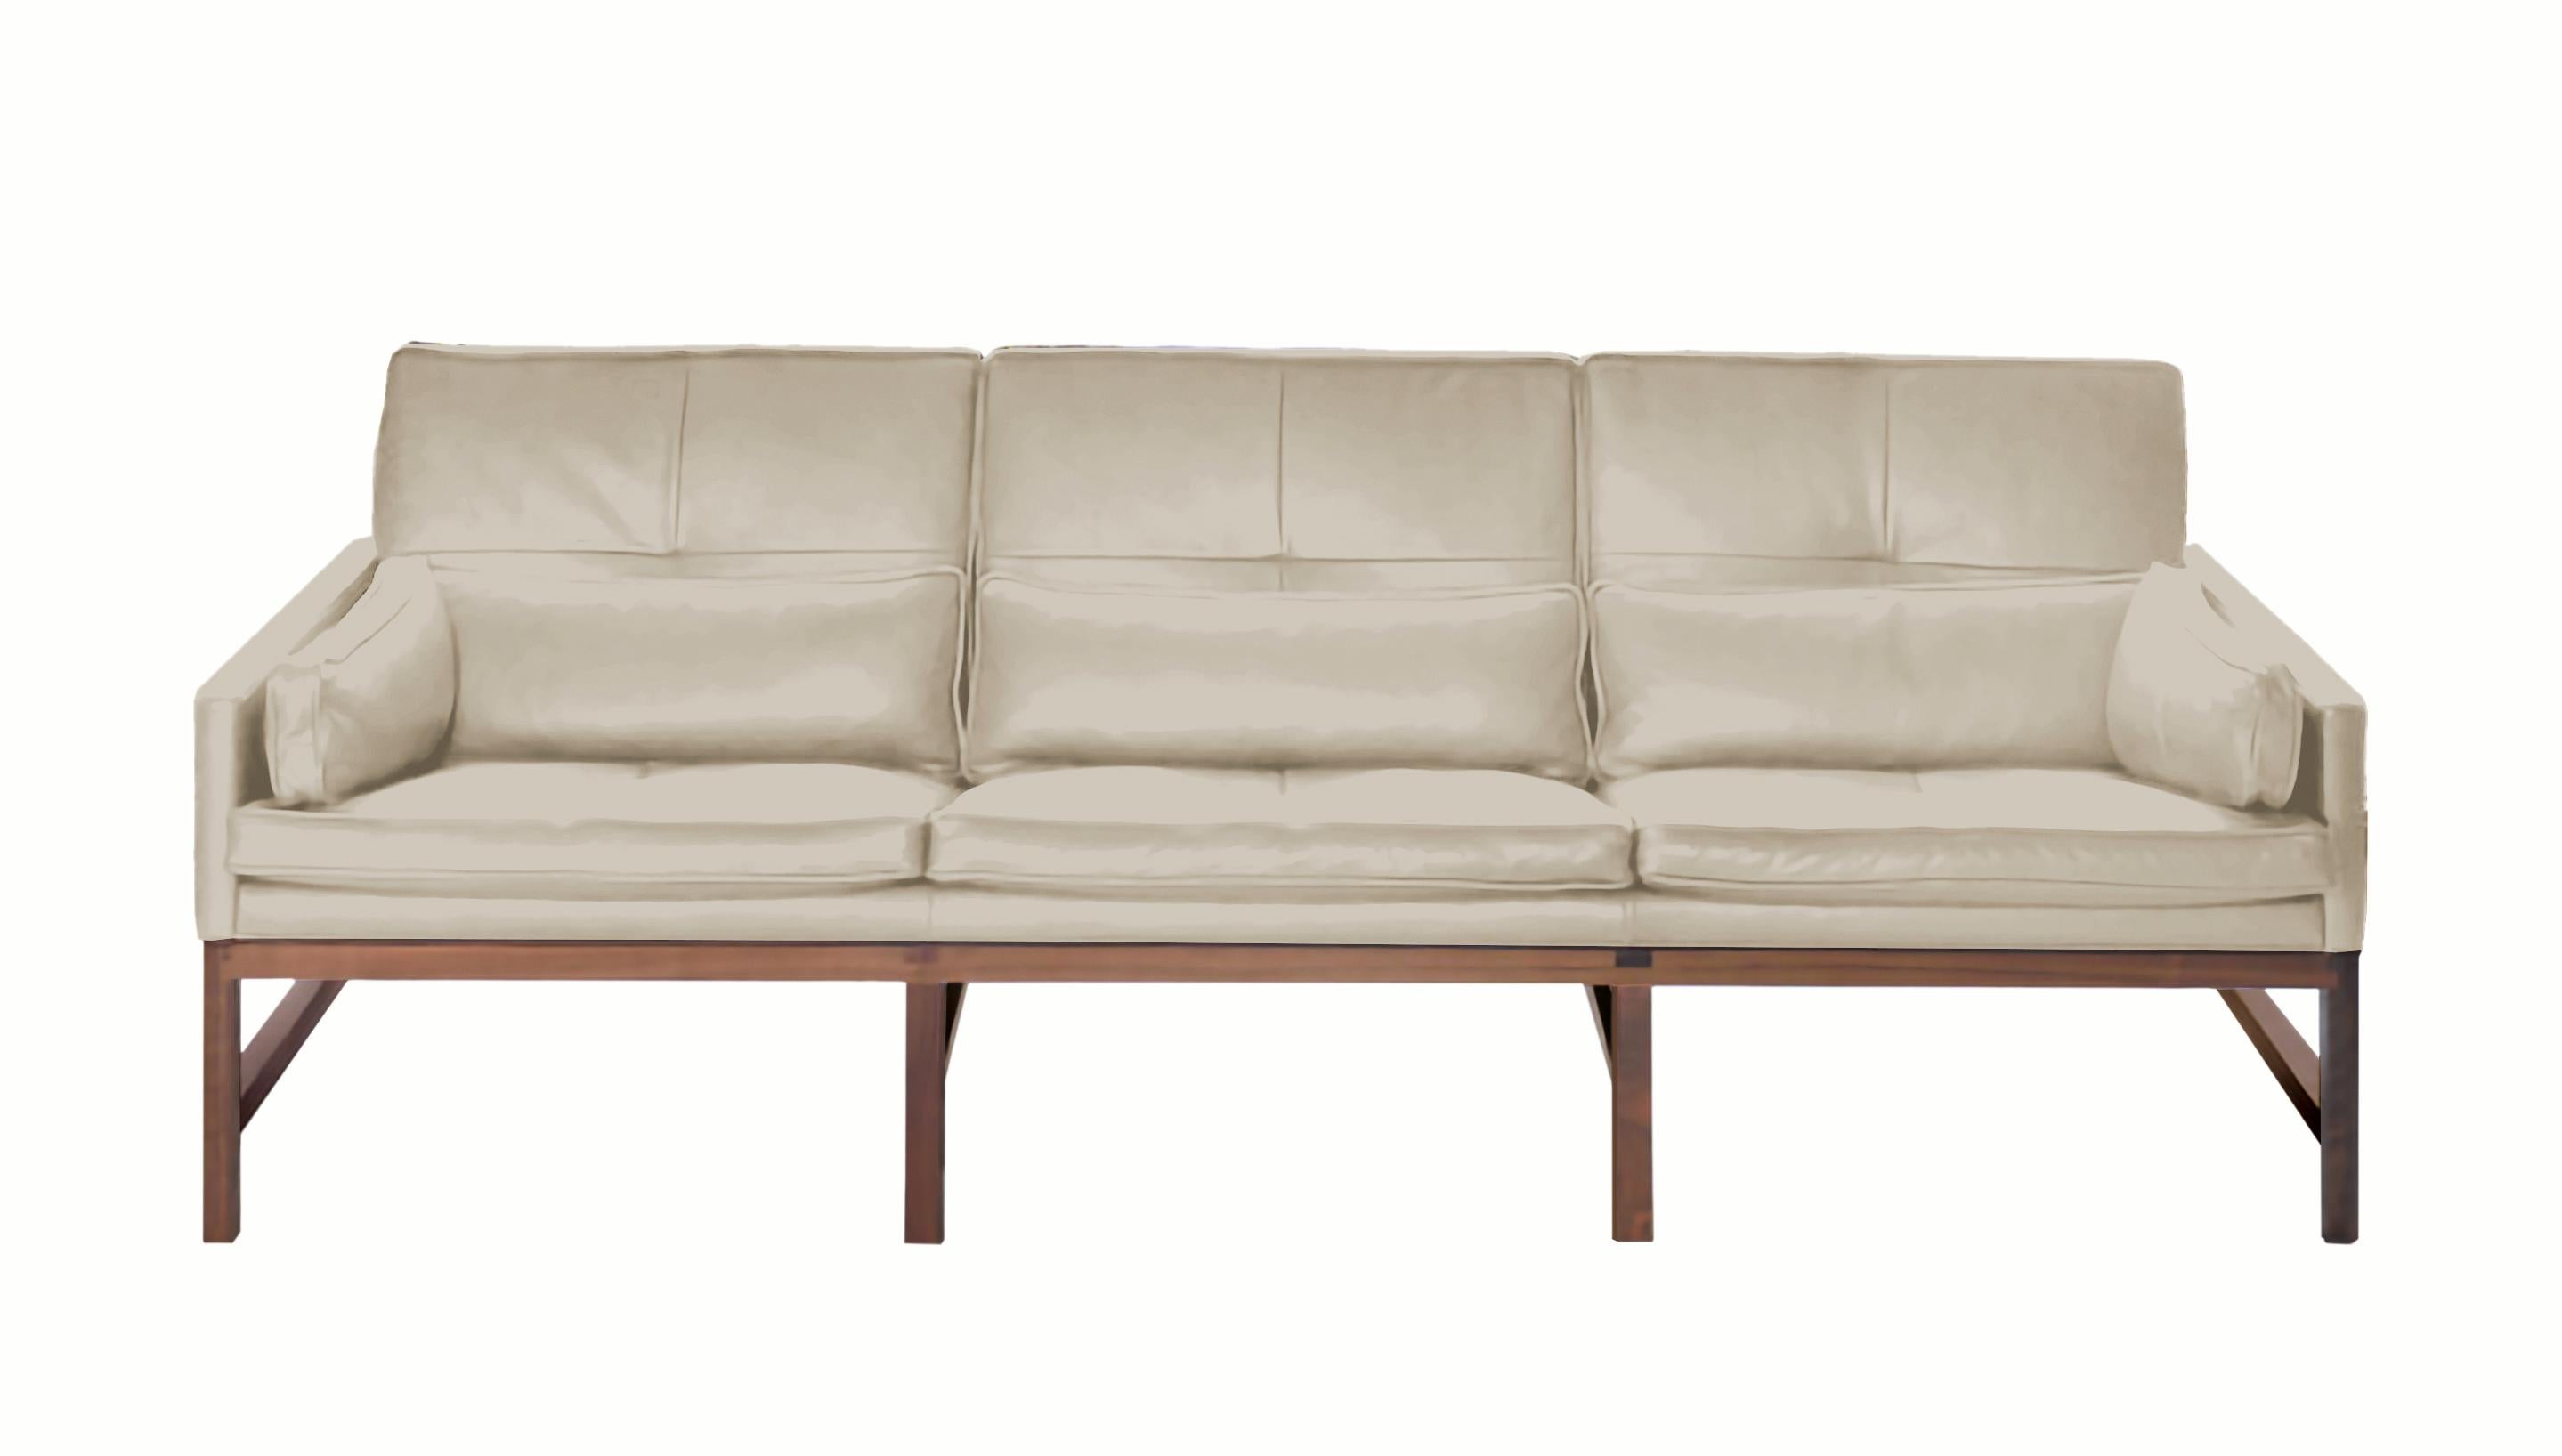 For Sale: Gray (Comfort 12114 Gray Beige) Wood Frame Low Back Sofa in Walnut and Leather Designed by Craig Bassam